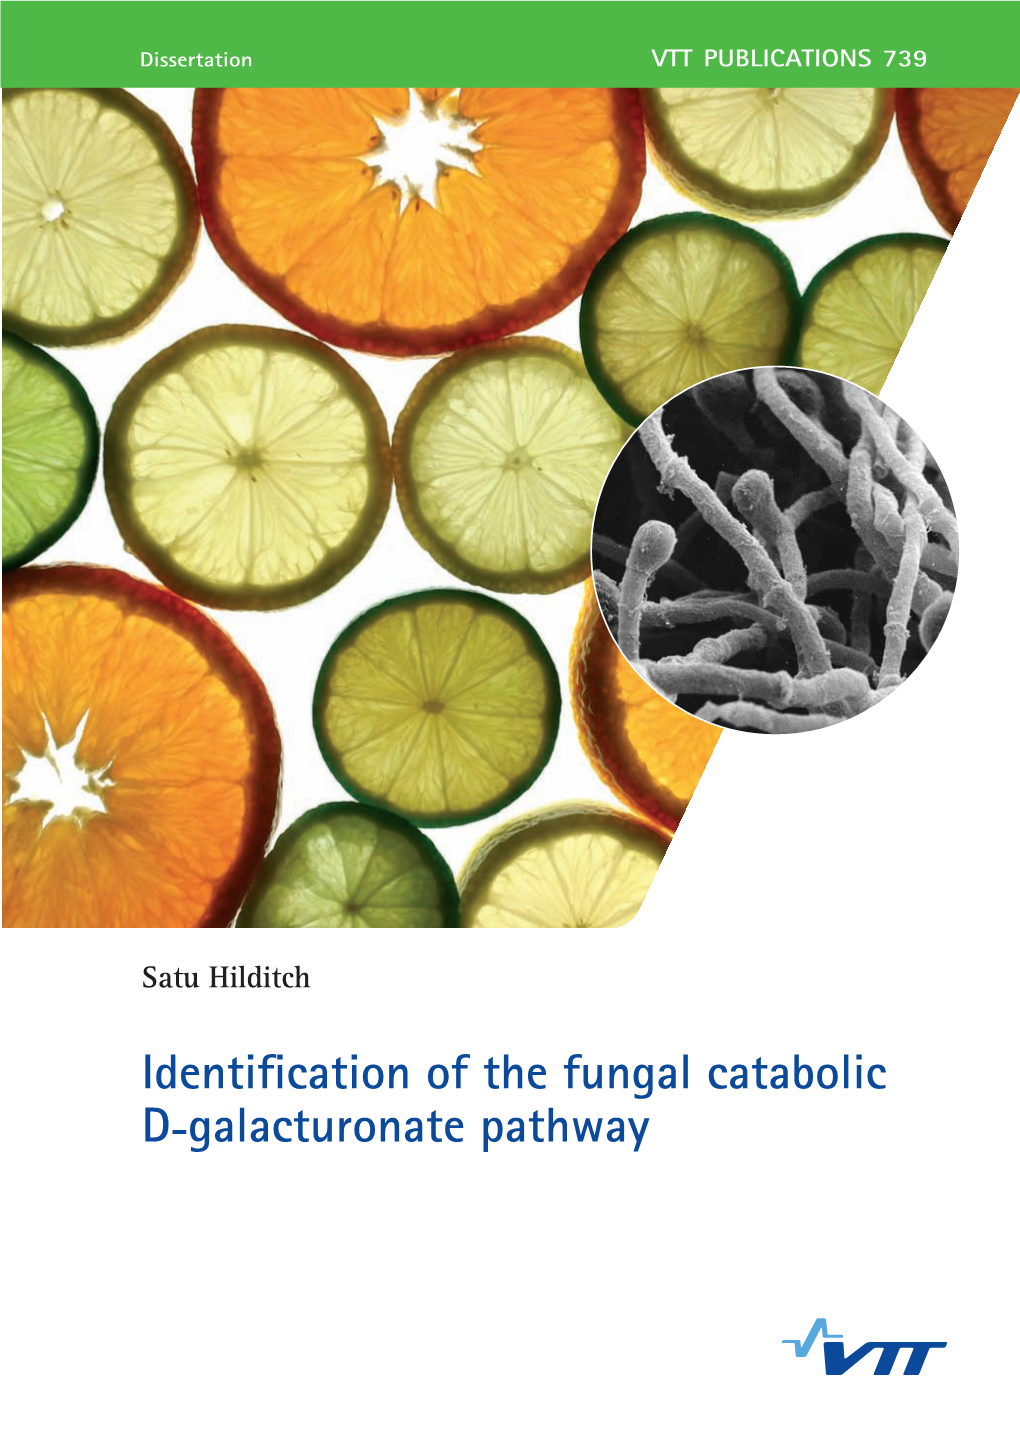 Identification of the Fungal Catabolic D-Galacturonate Pathway